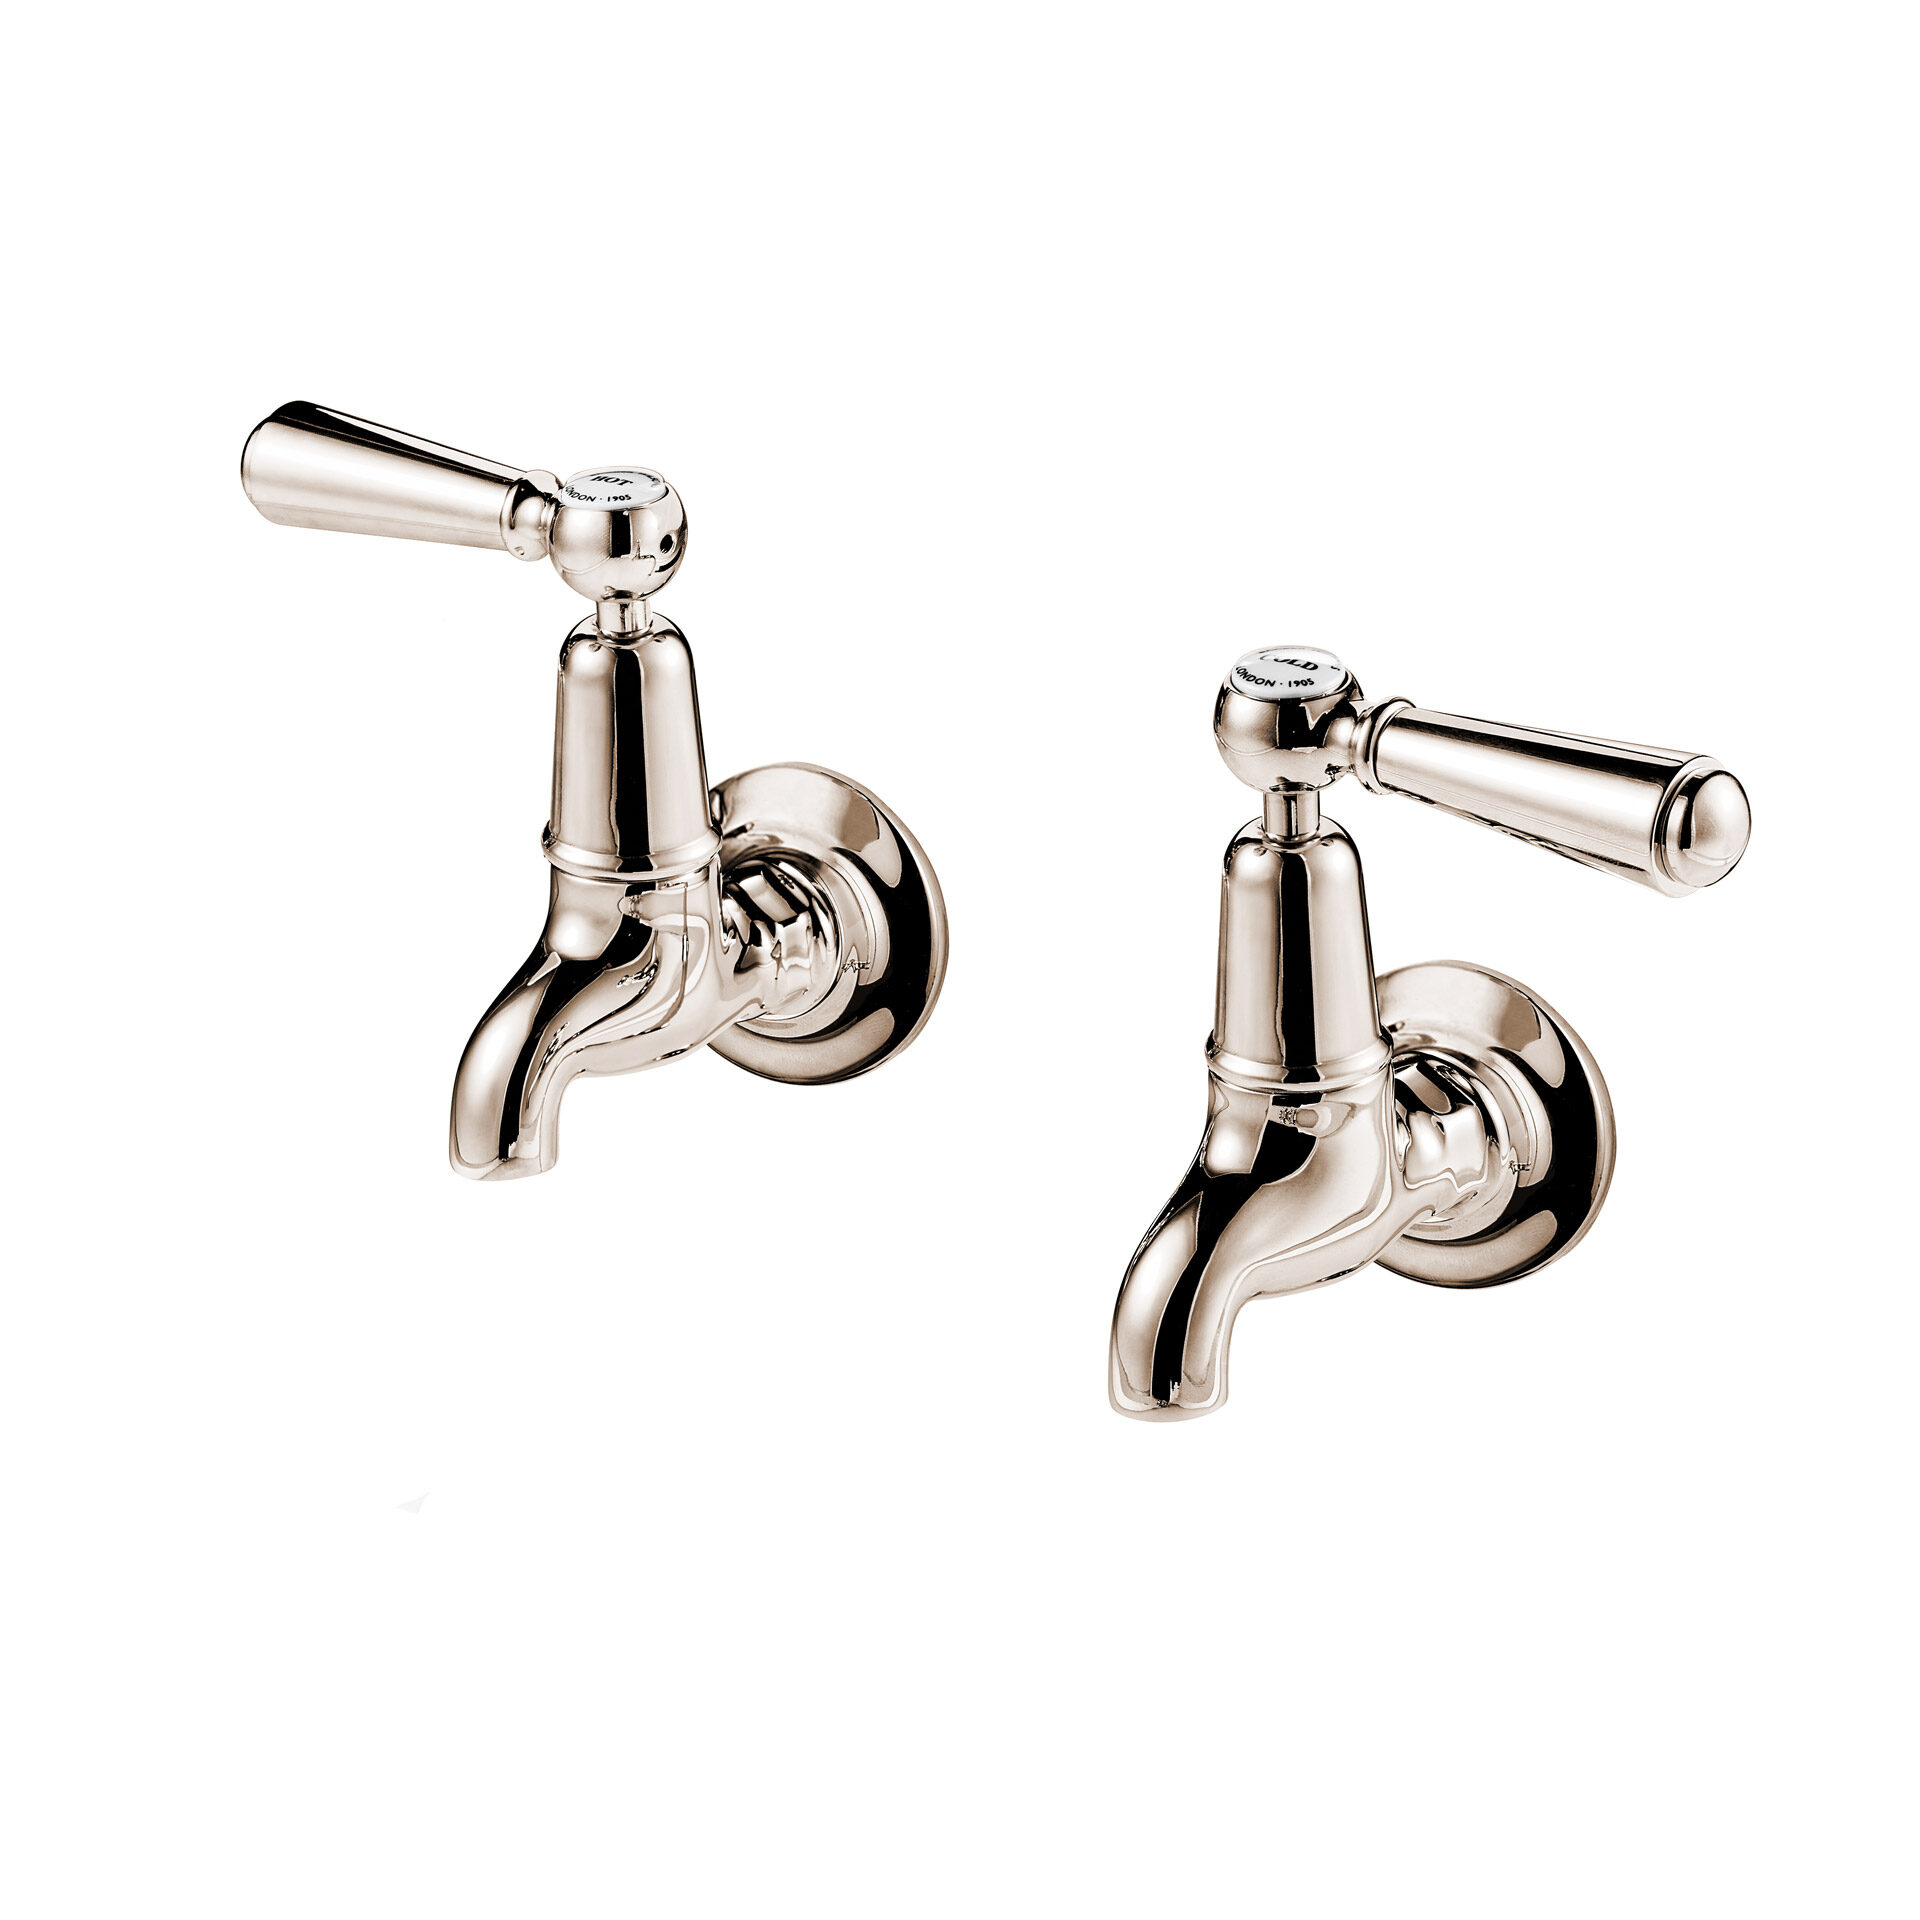 Wall mounted bib taps with metal lever handle British made